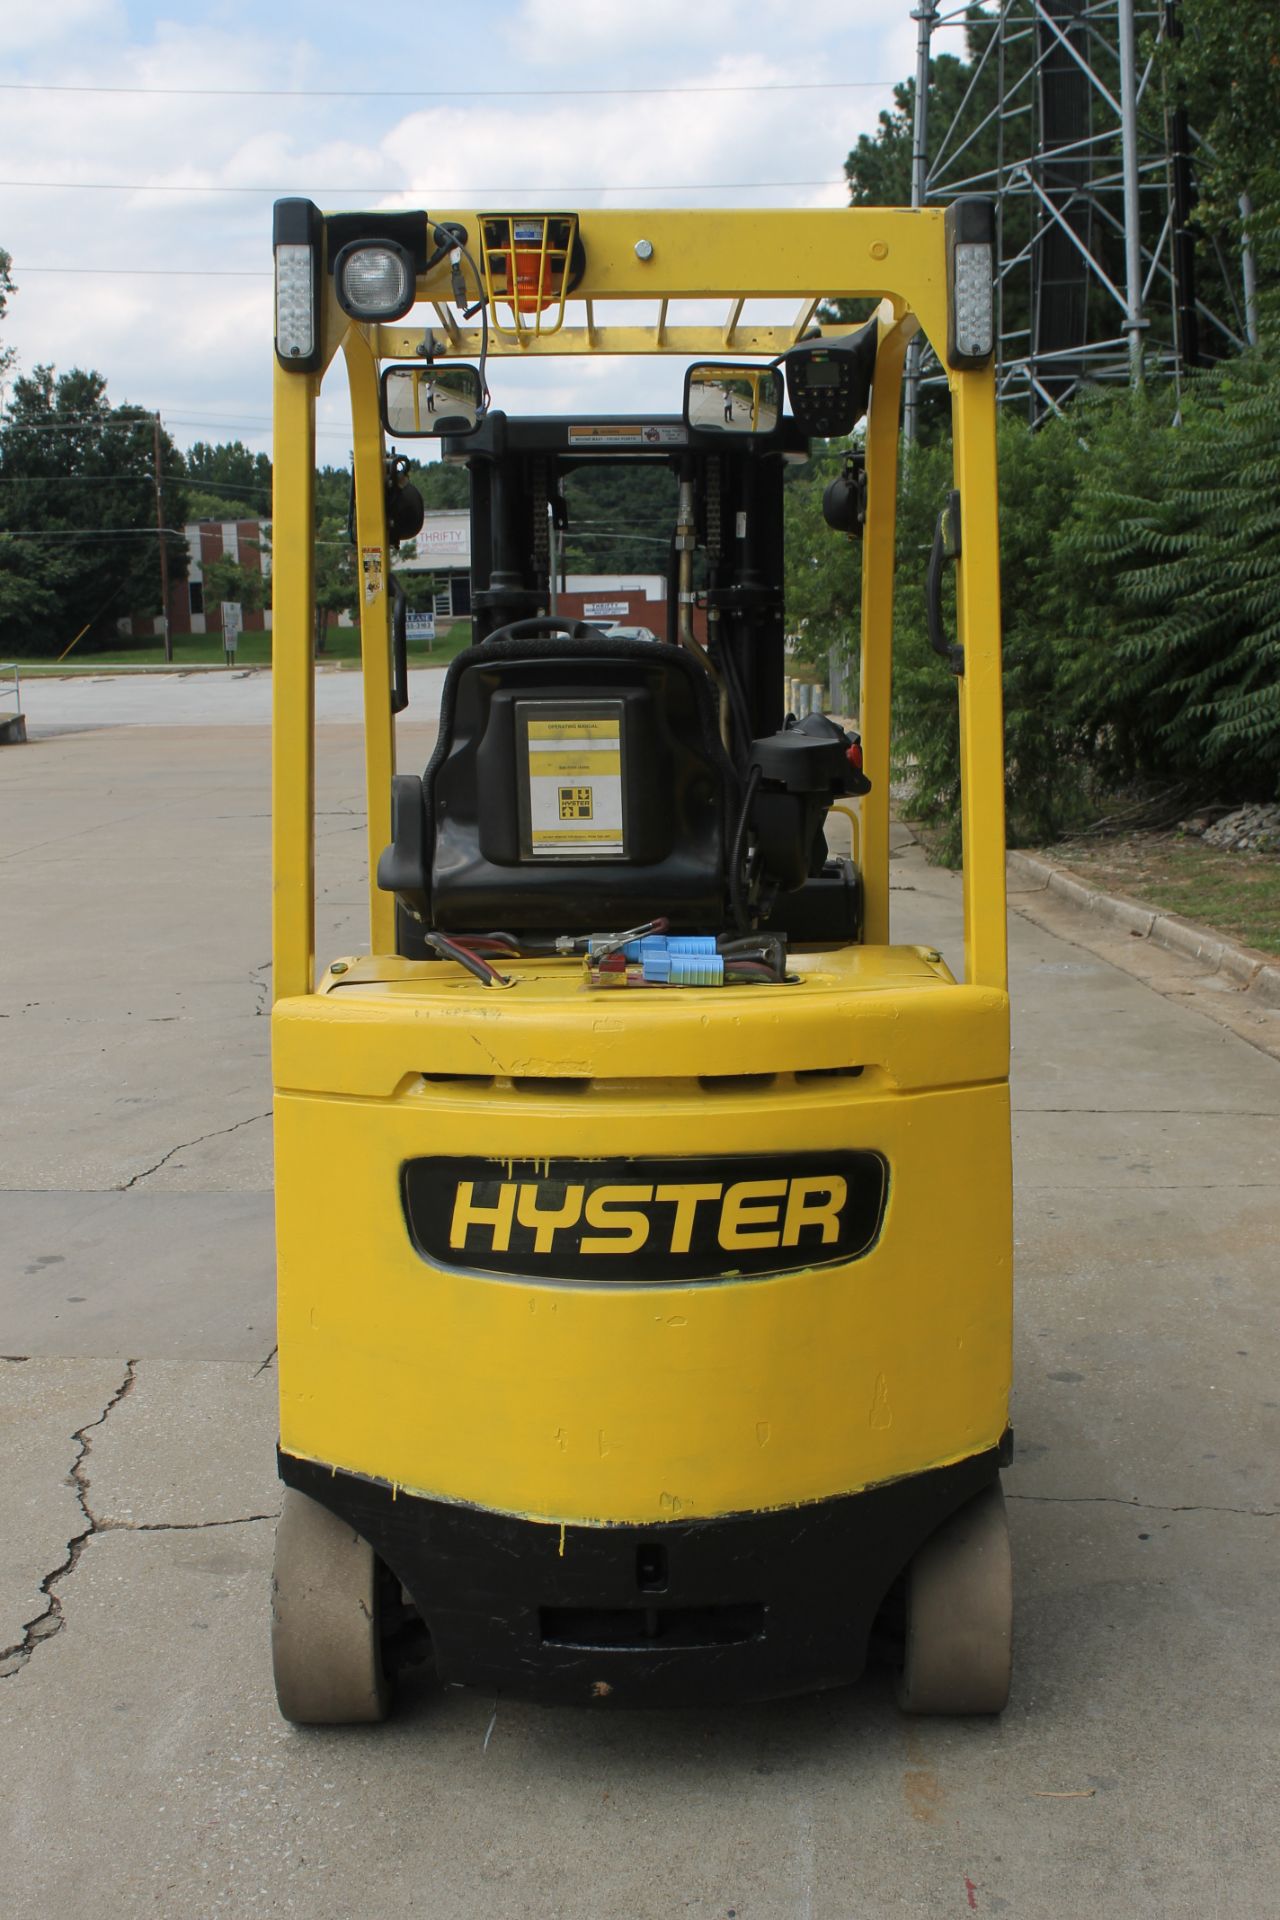 2012 HYSTER 5000 LBS. CAPACITY ELECTRIC FORKLIFT WITH 48 VOLTS BATTERY CHARGER, CLICK TO WATCH VIDEO - Image 8 of 8